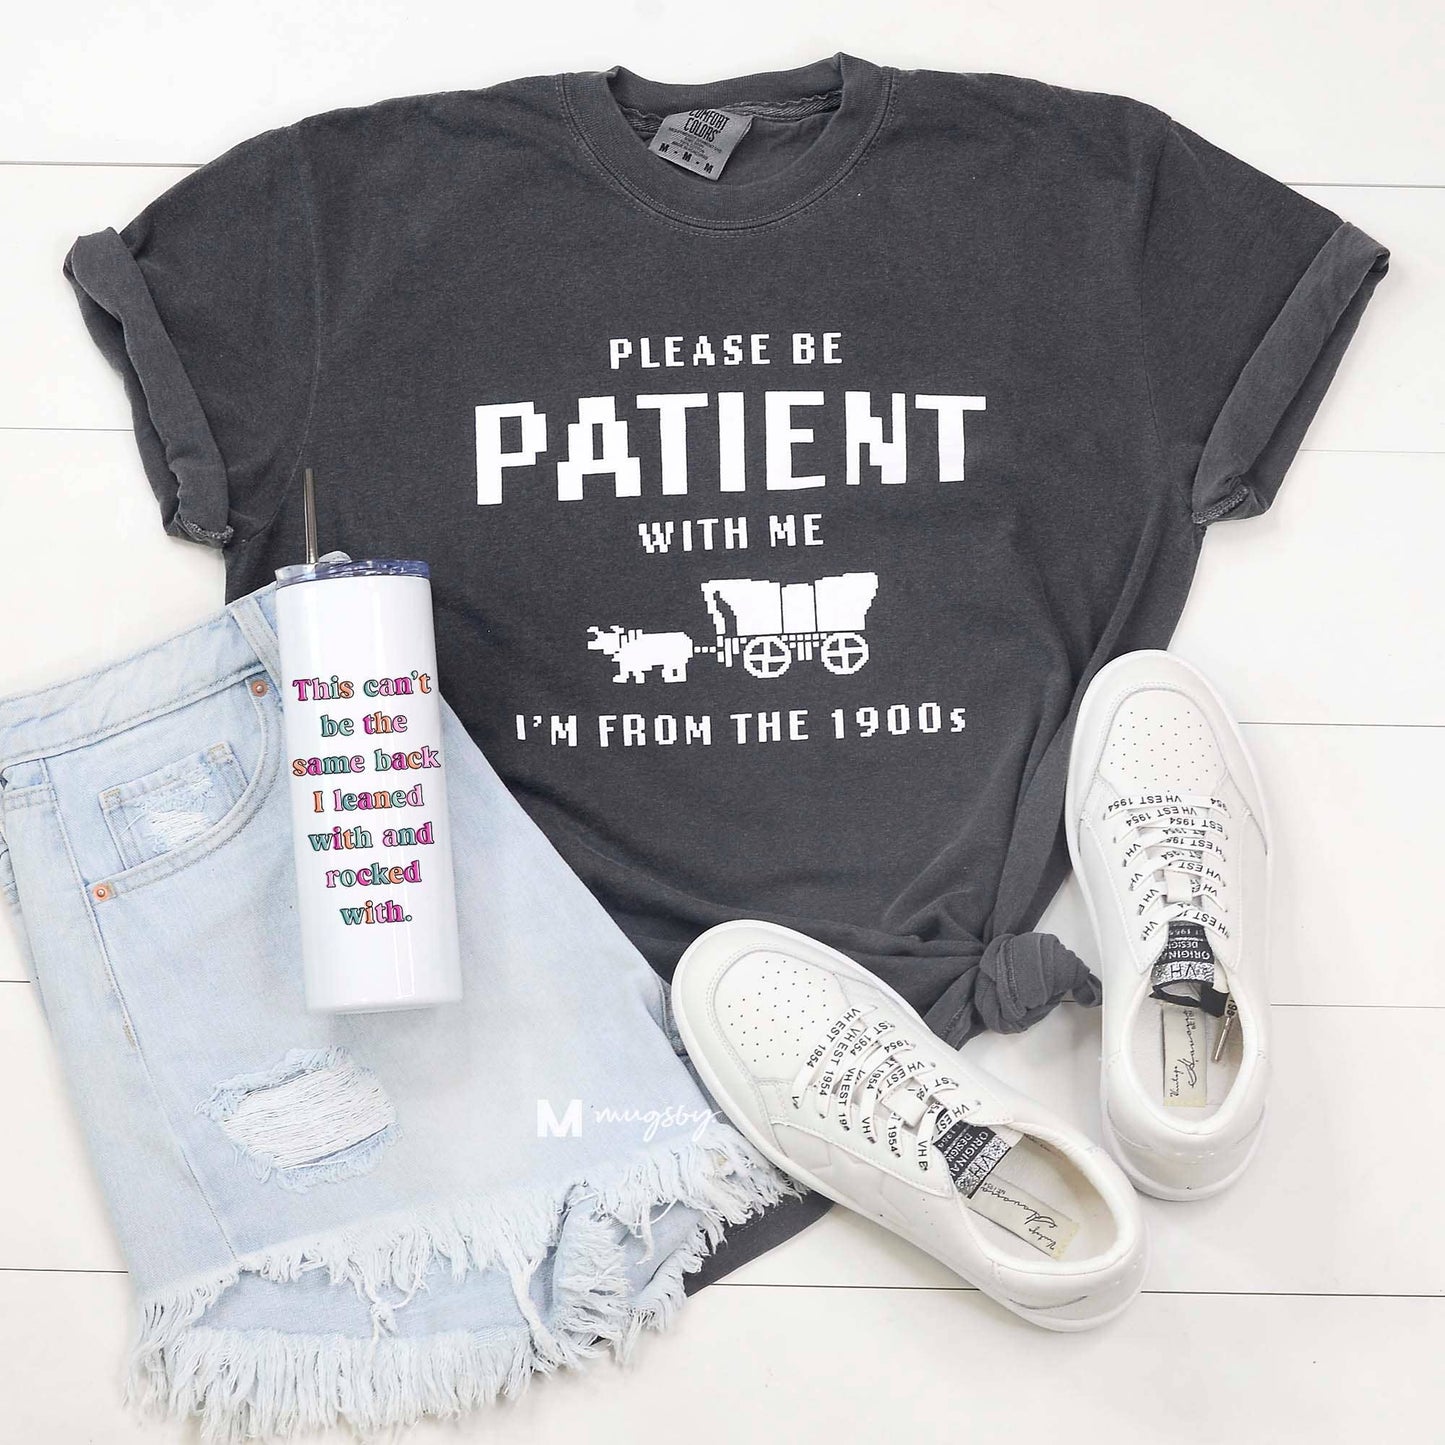 Tee Shirt (Short Sleeve) - Please Be Patient With Me I'm From the 1900s